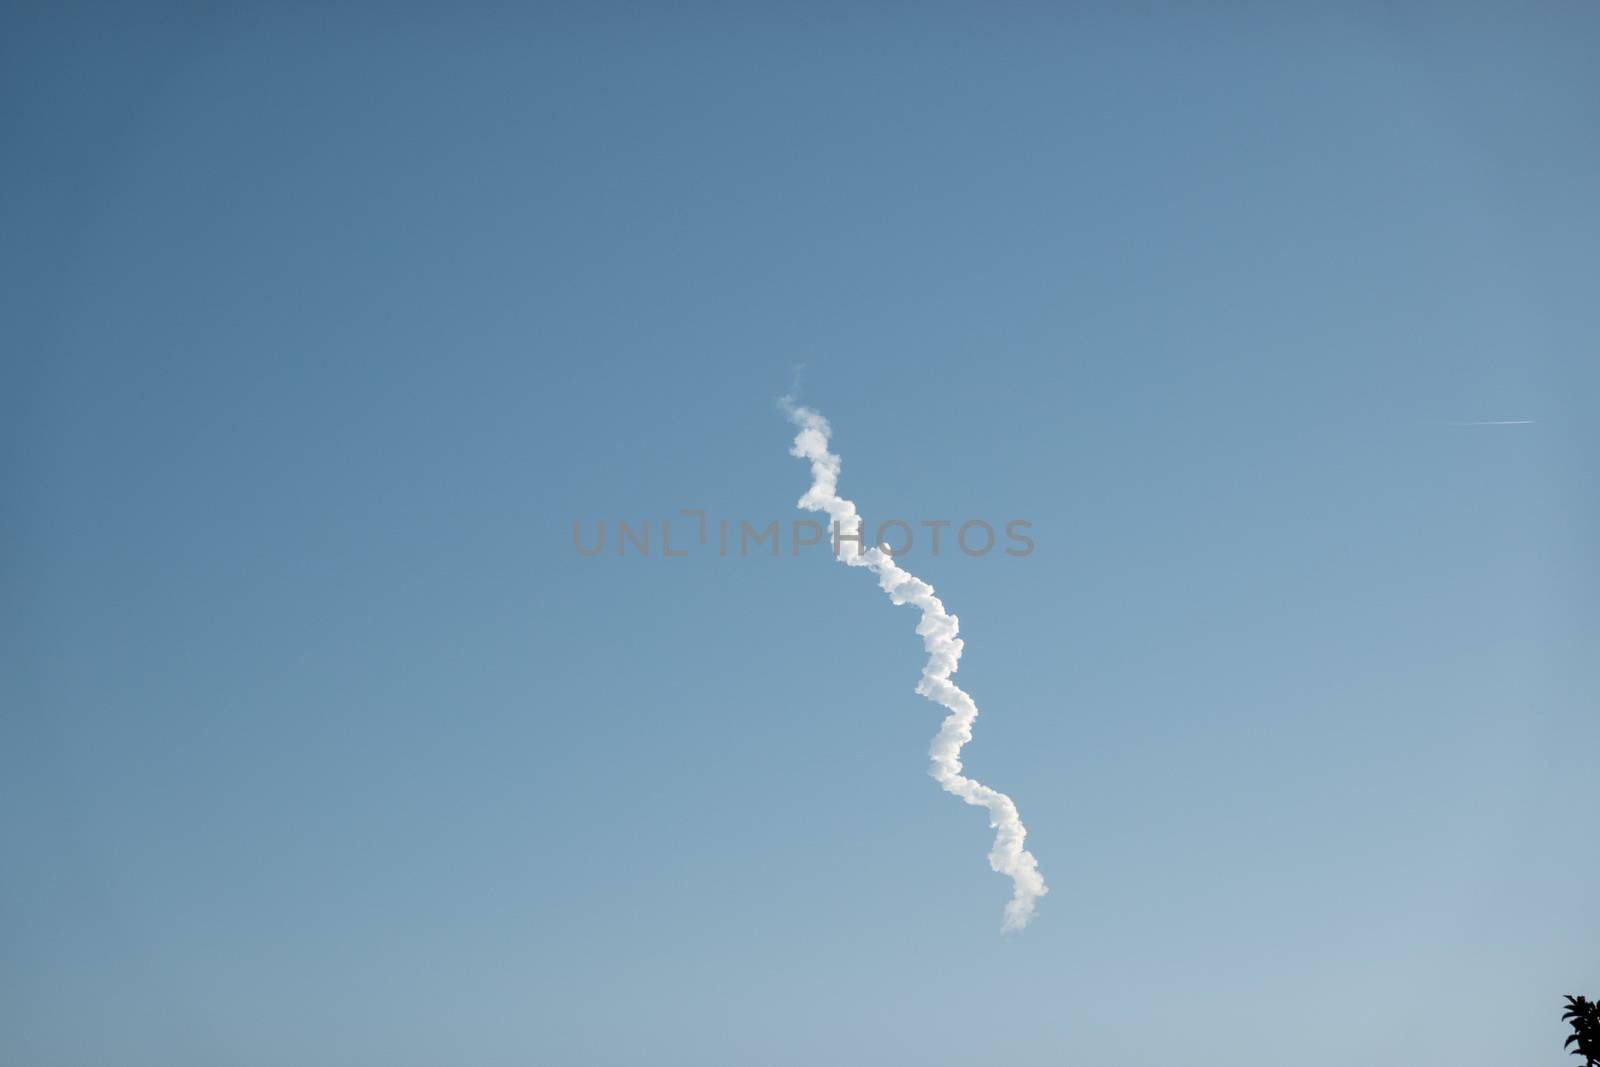 Exhaust trail from a rocket launch in Florida.